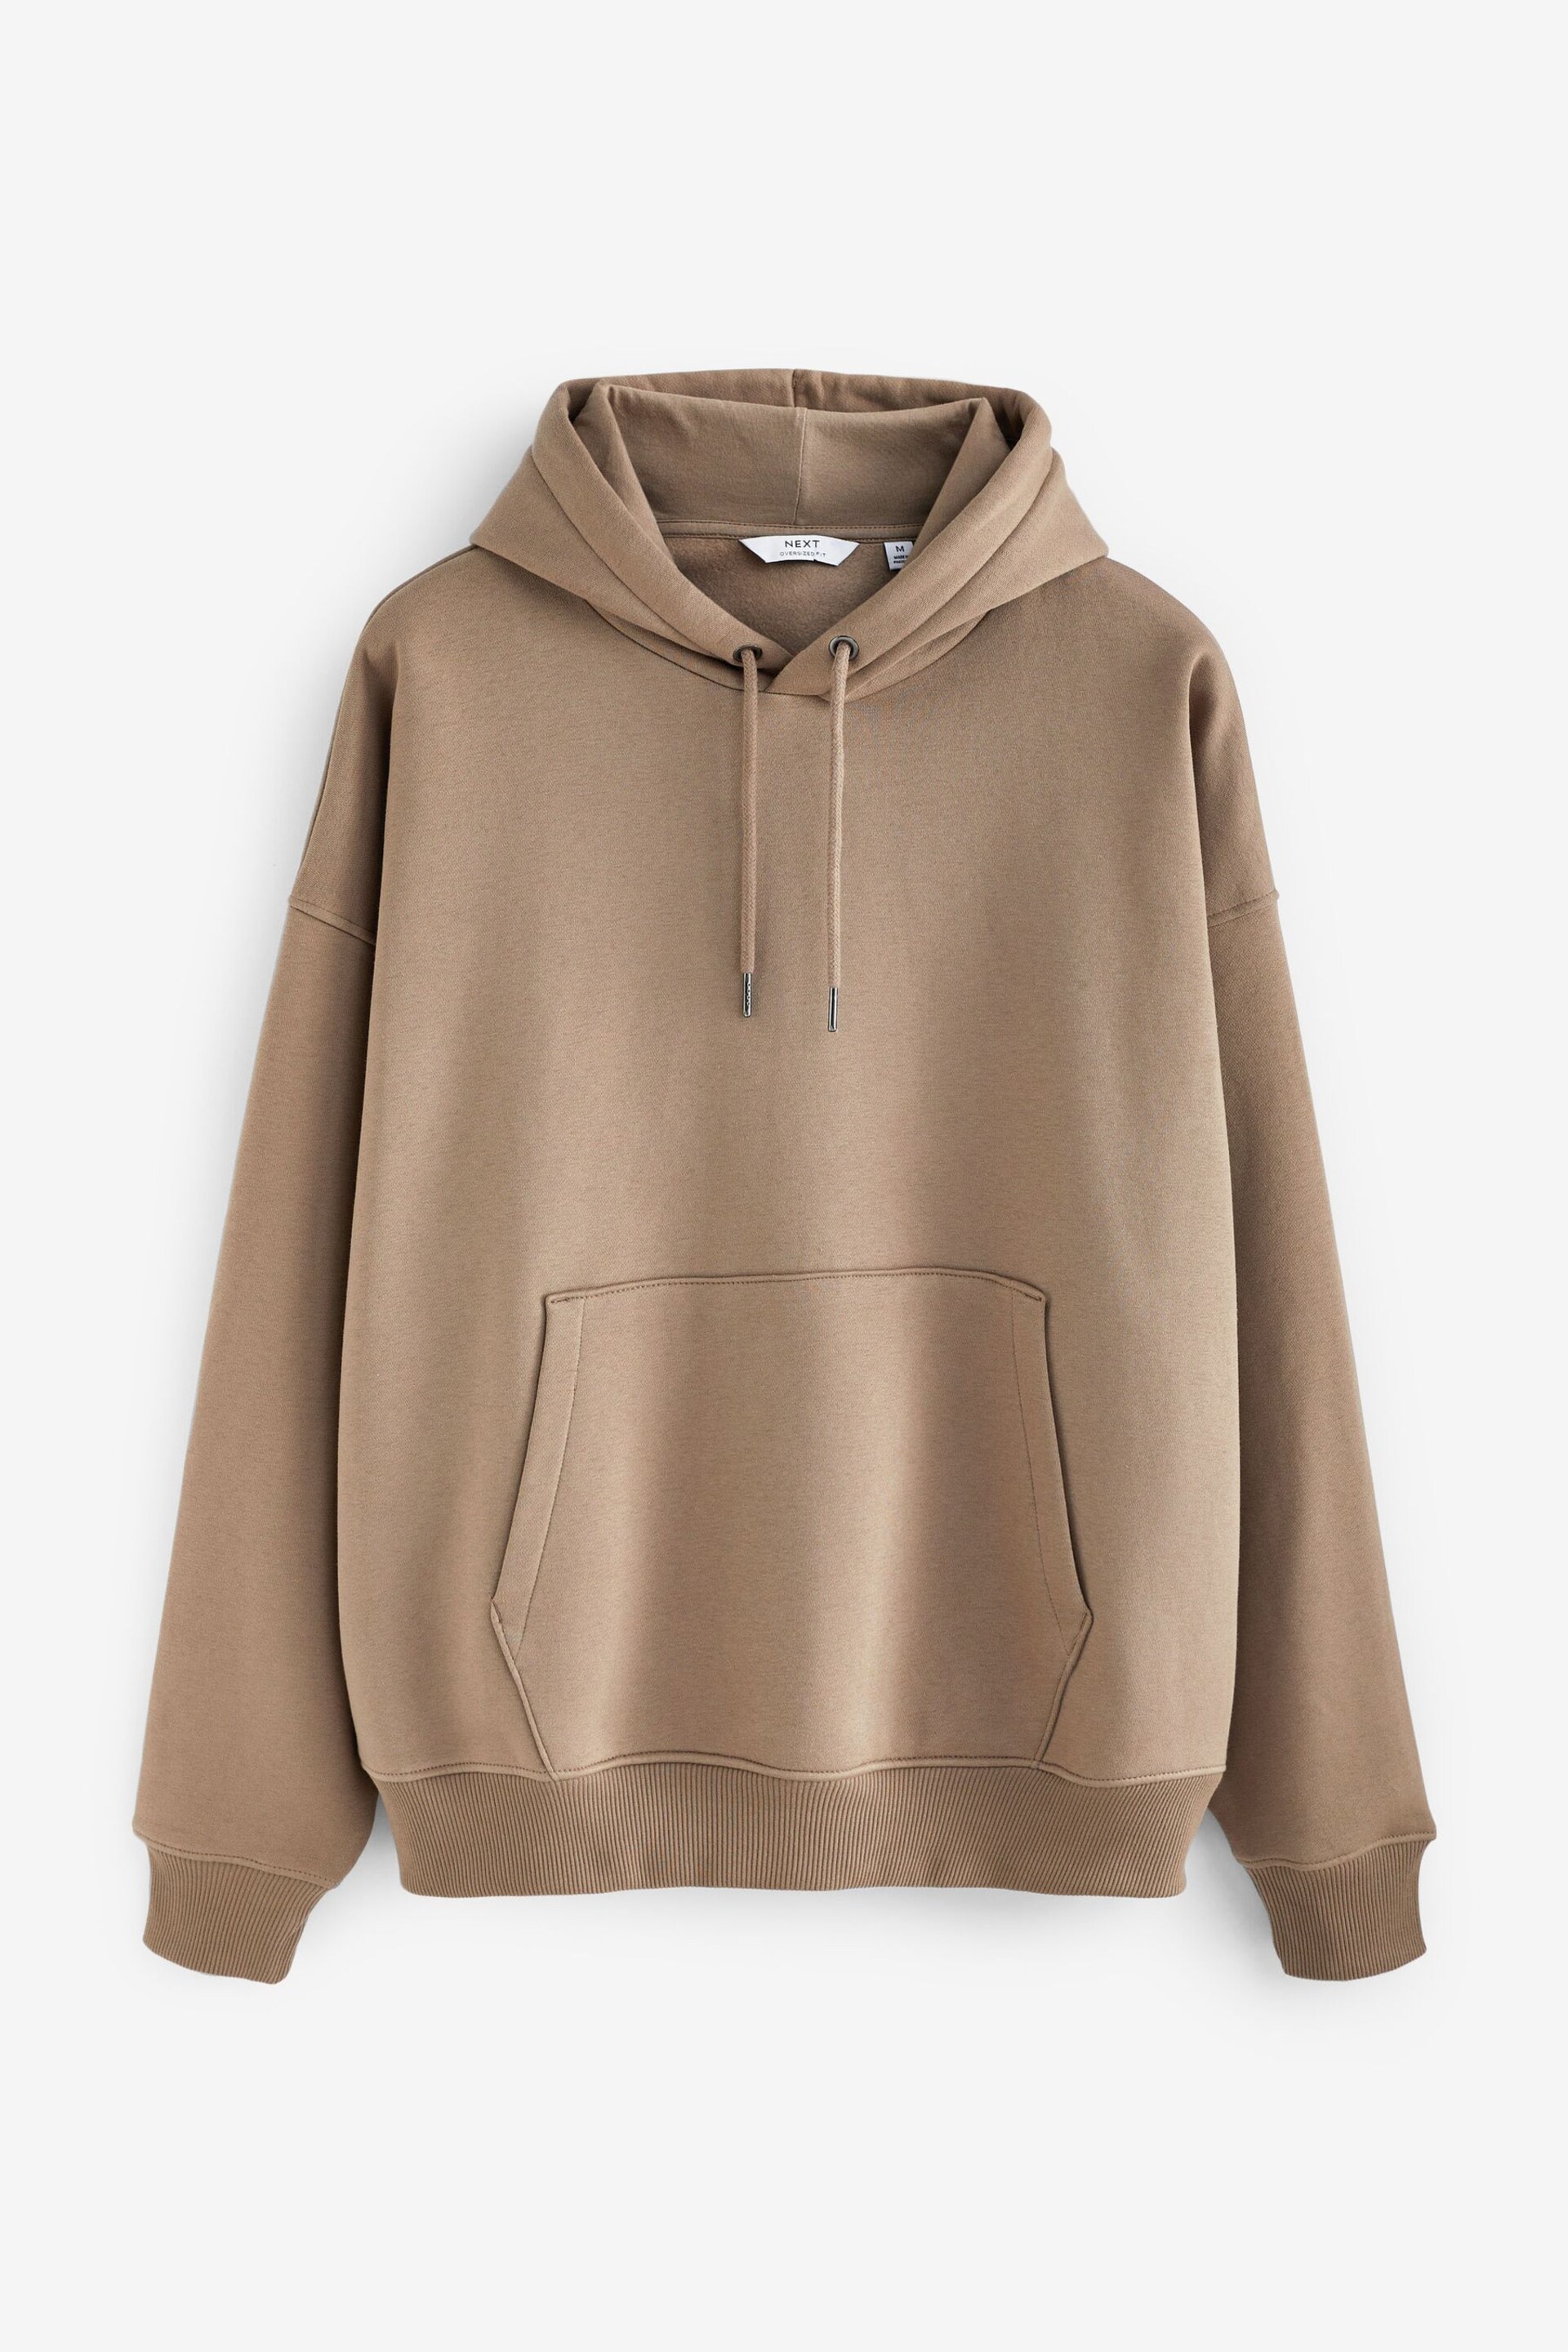 Stone Natural Oversized Jersey Cotton Rich Overhead Hoodie - Image 4 of 7